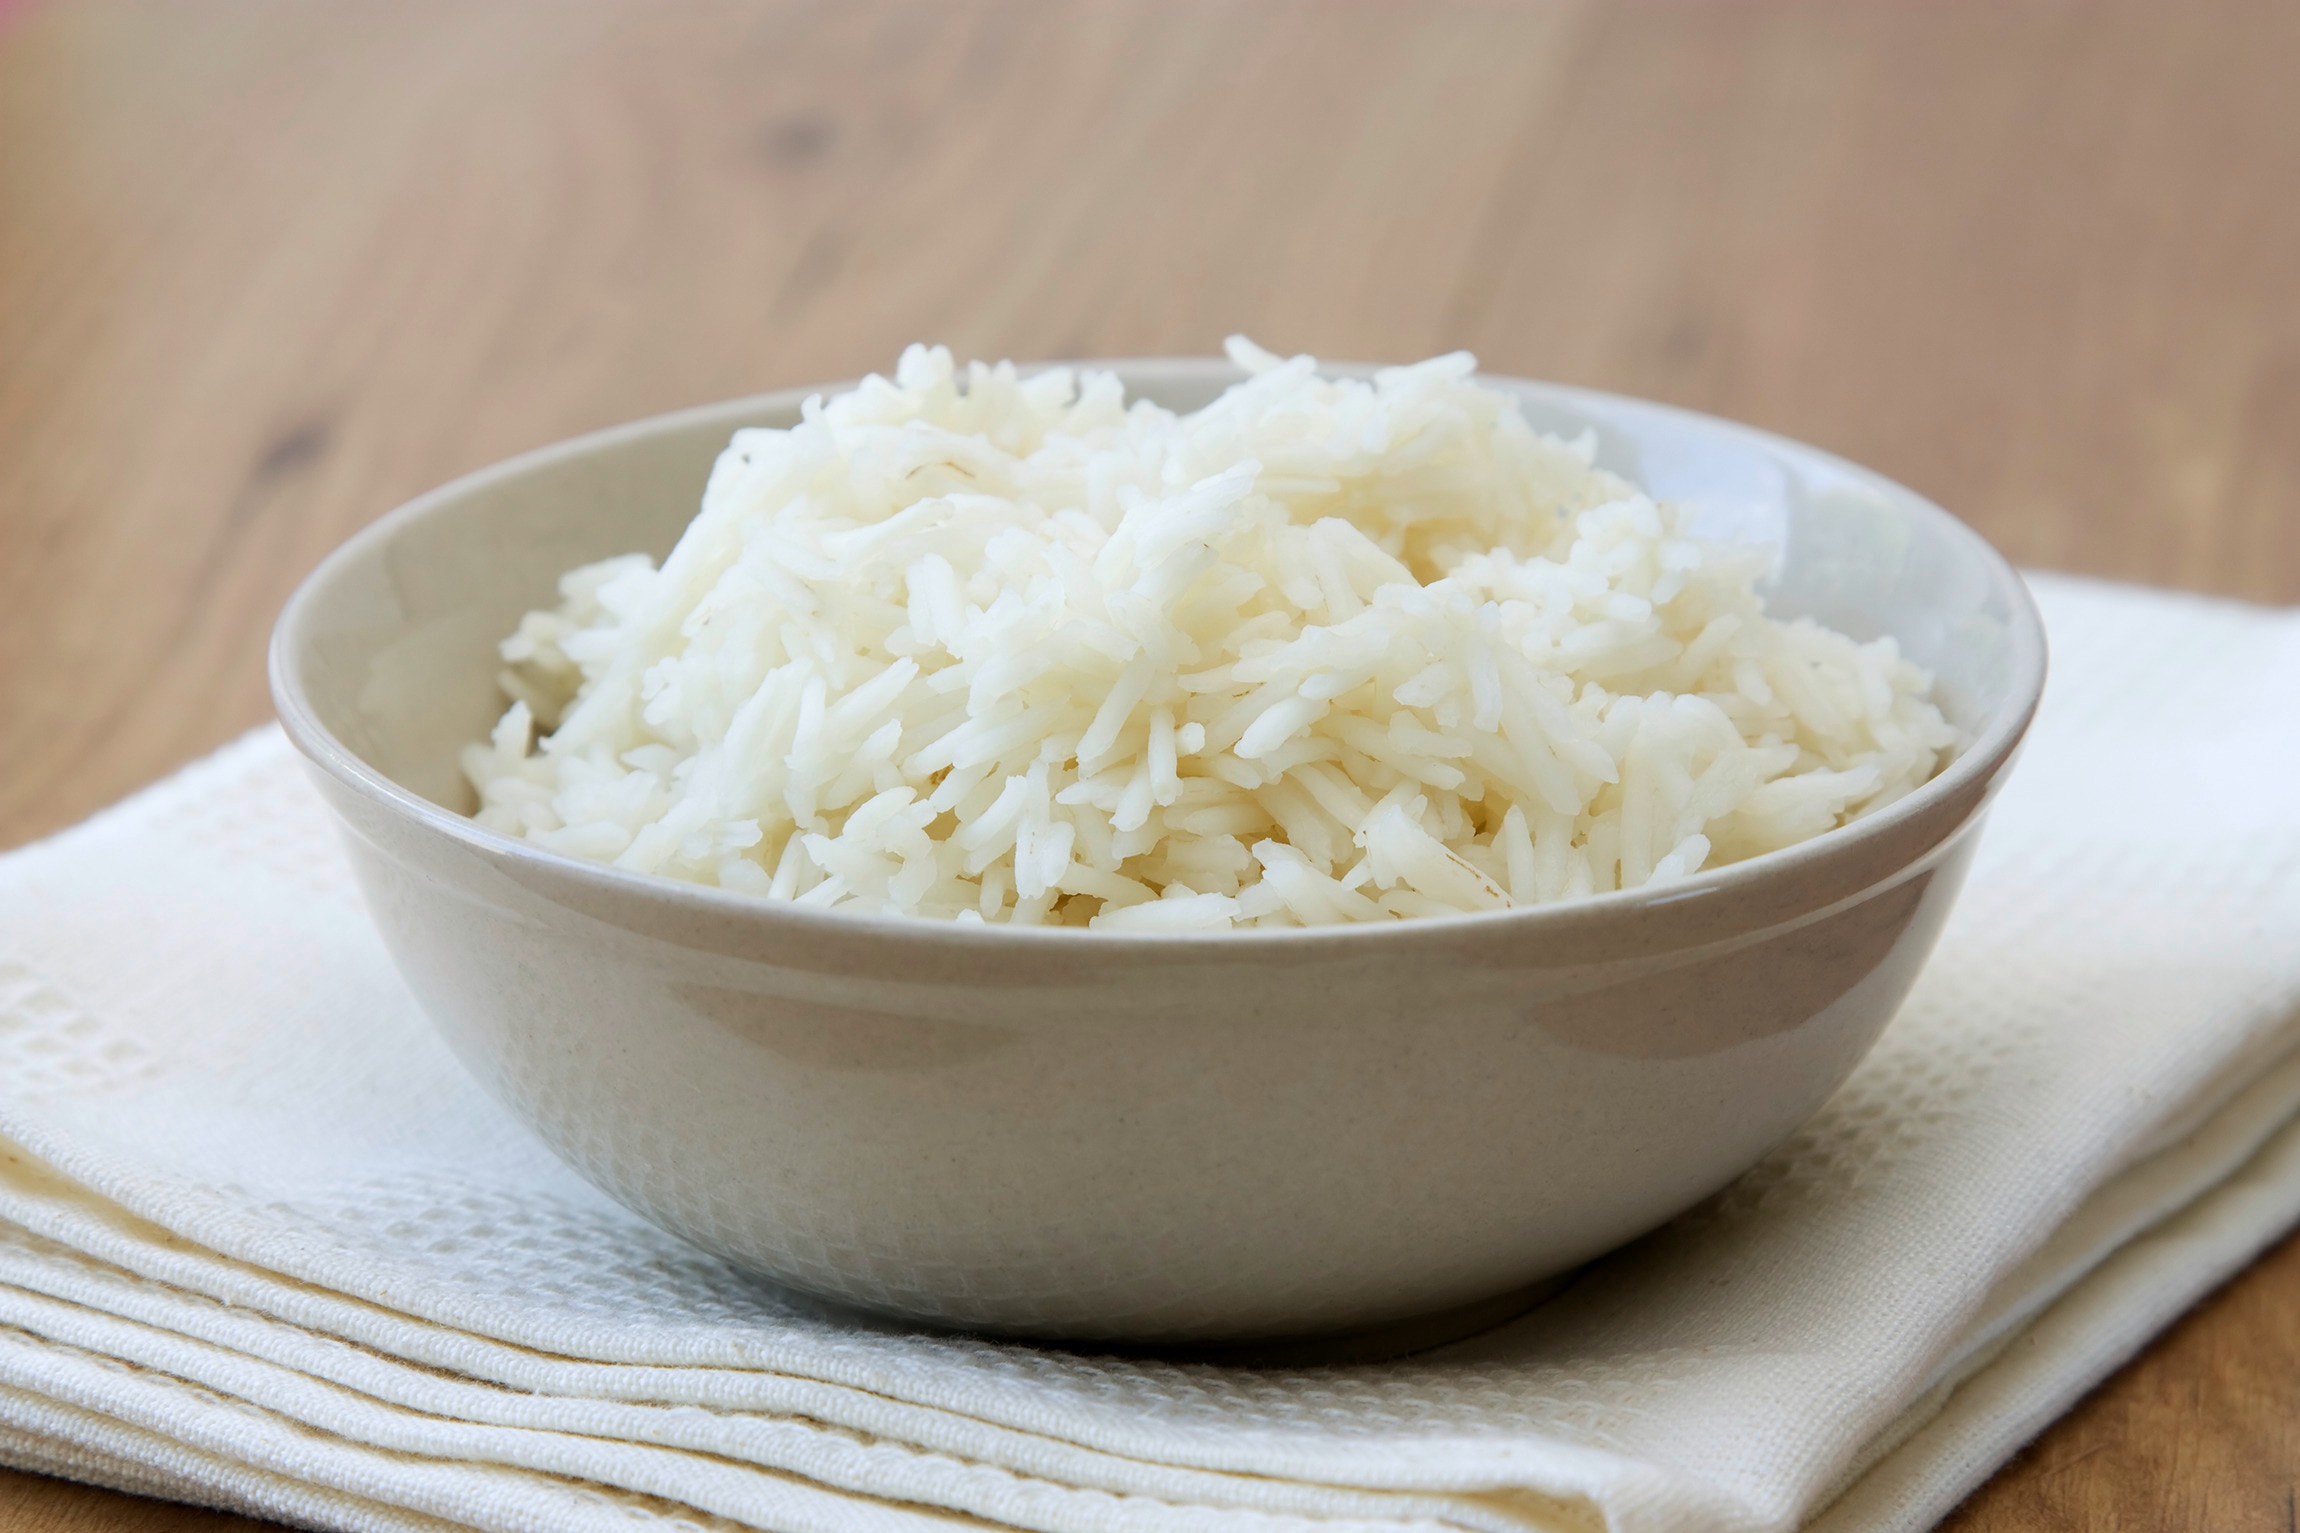 A bowl full of white rice served on a dish towel on a wooden table